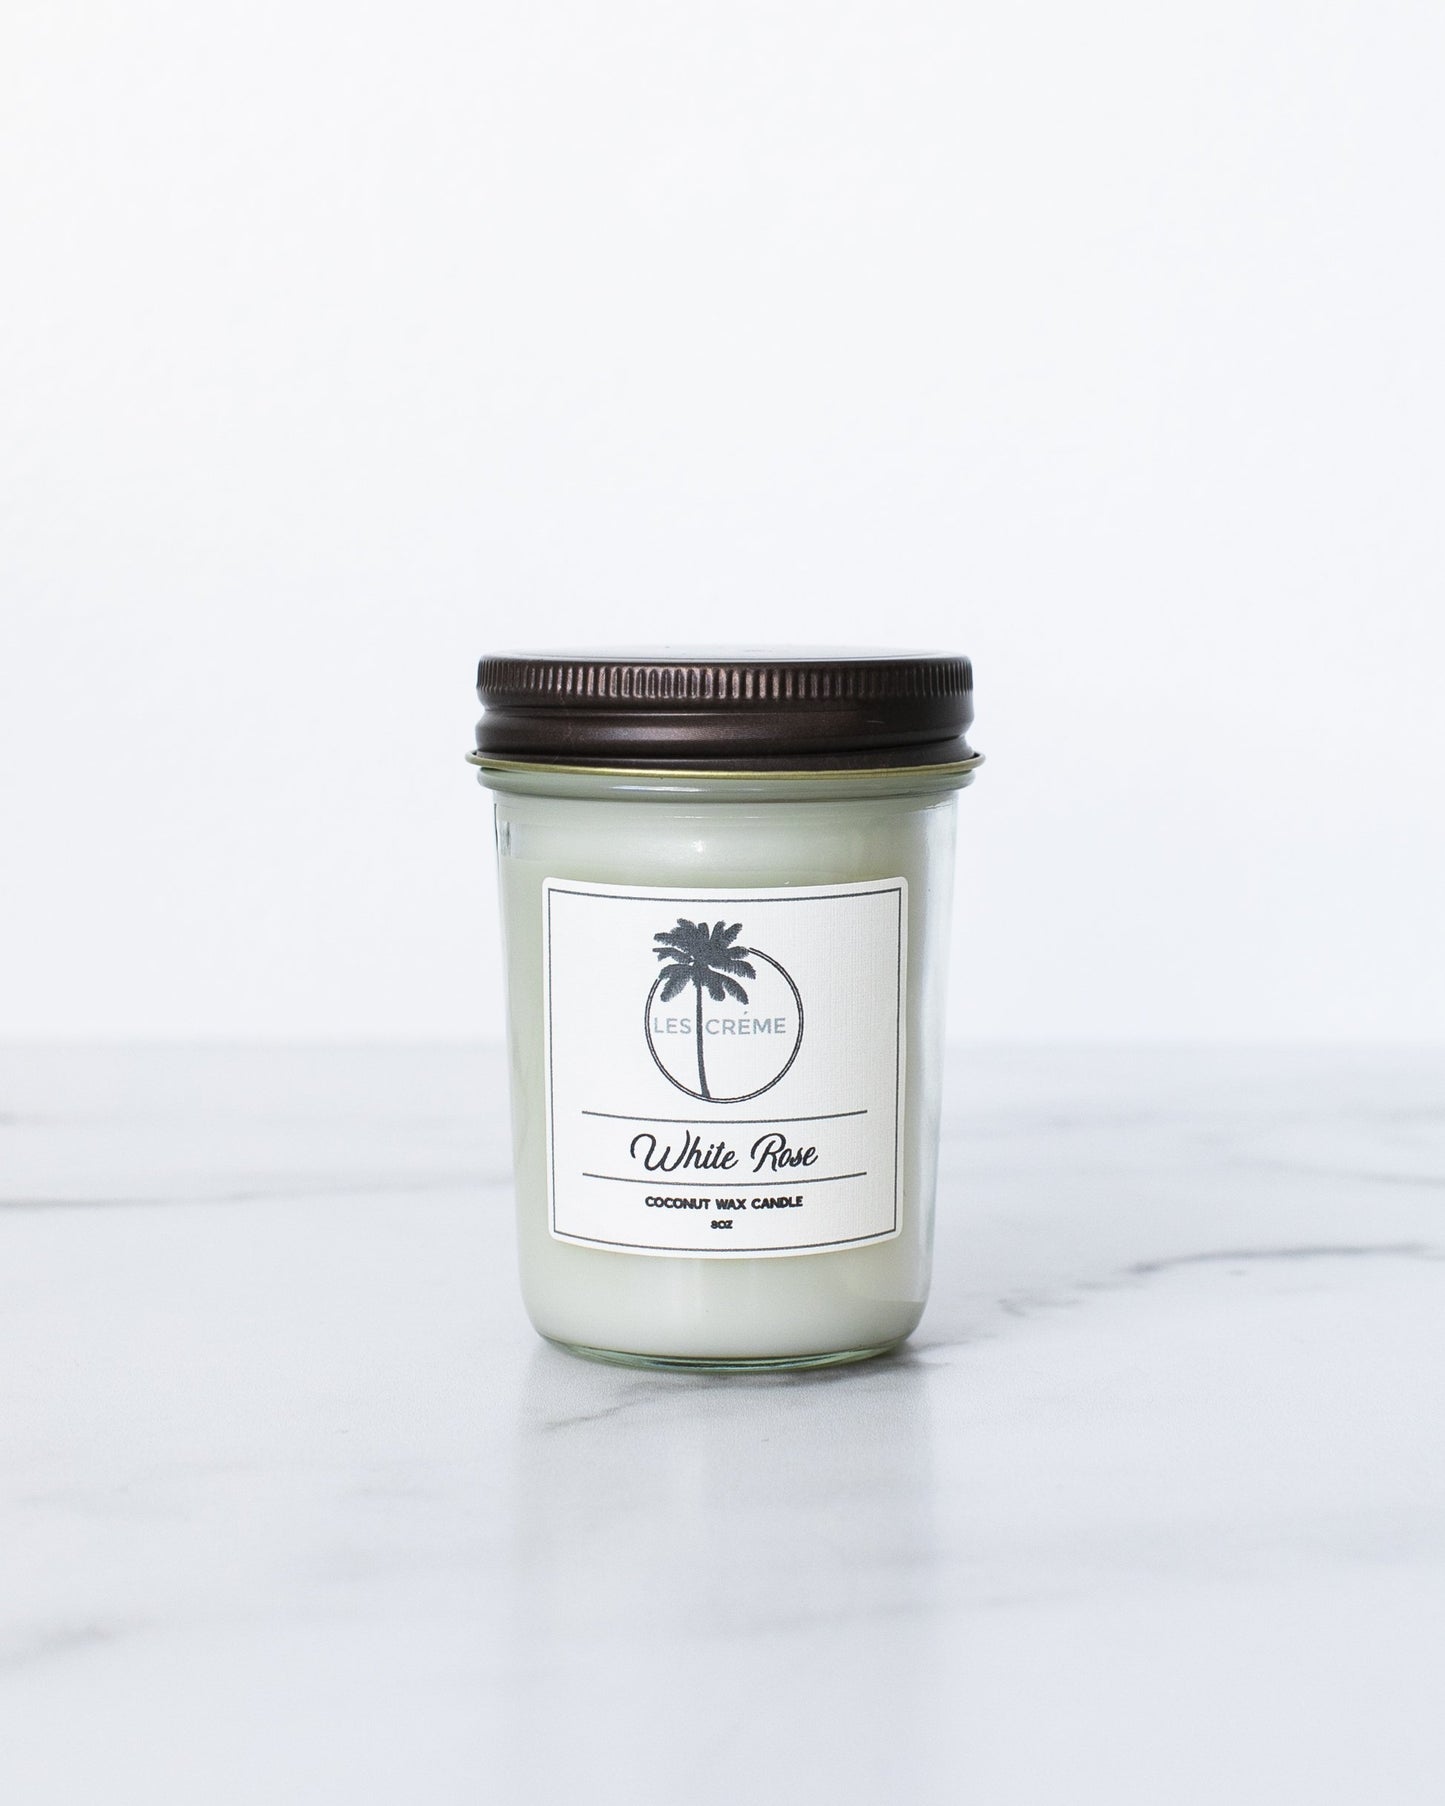 White Rose Scent Coconut Wax Candle - BagLunchproduct,corp